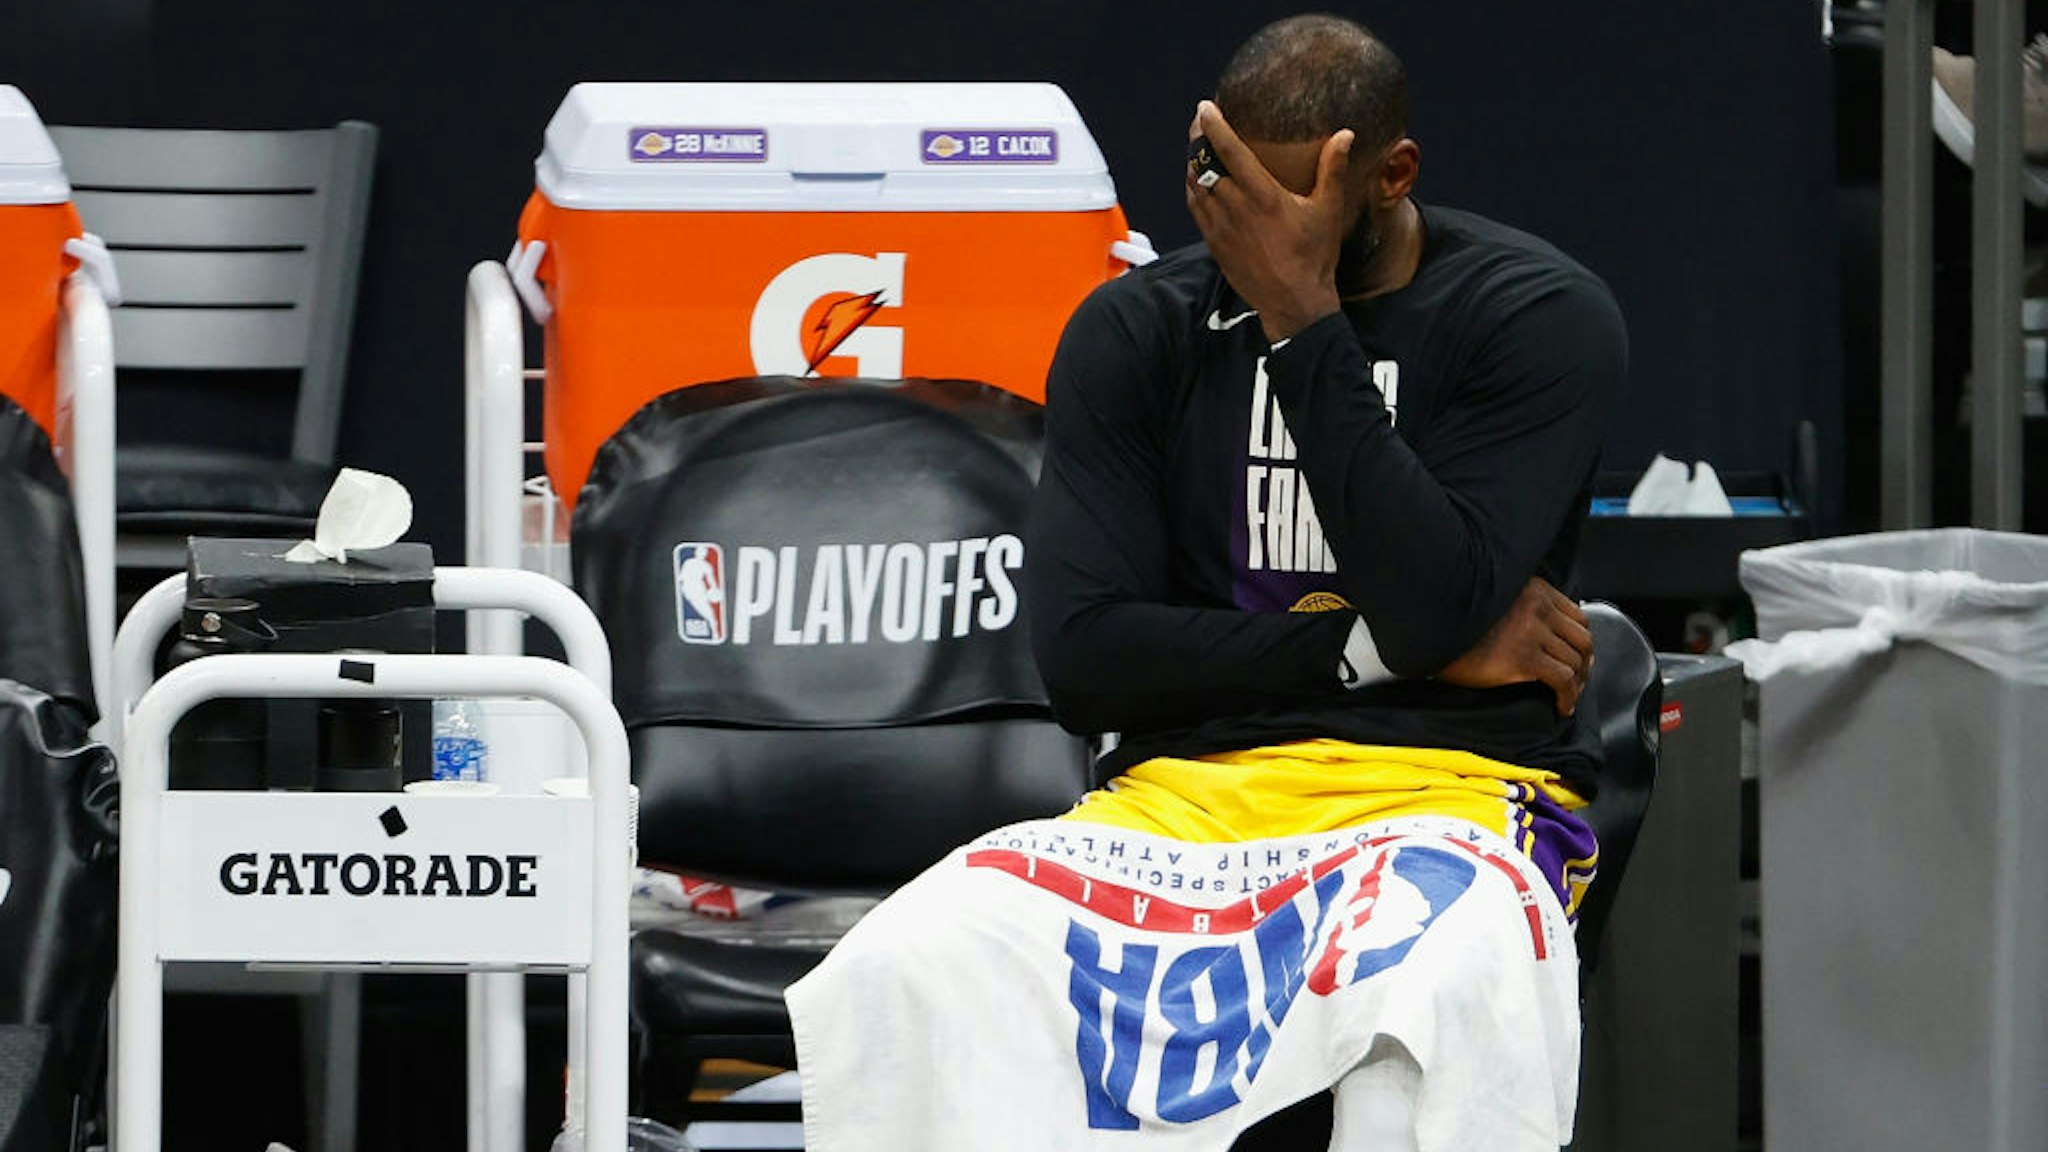 PHOENIX, ARIZONA - JUNE 01: LeBron James #23 of the Los Angeles Lakers reacts on the bench during the second half in Game Five of the Western Conference first-round playoff series at Phoenix Suns Arena on June 01, 2021 in Phoenix, Arizona. NOTE TO USER: User expressly acknowledges and agrees that, by downloading and or using this photograph, User is consenting to the terms and conditions of the Getty Images License Agreement. (Photo by Christian Petersen/Getty Images)